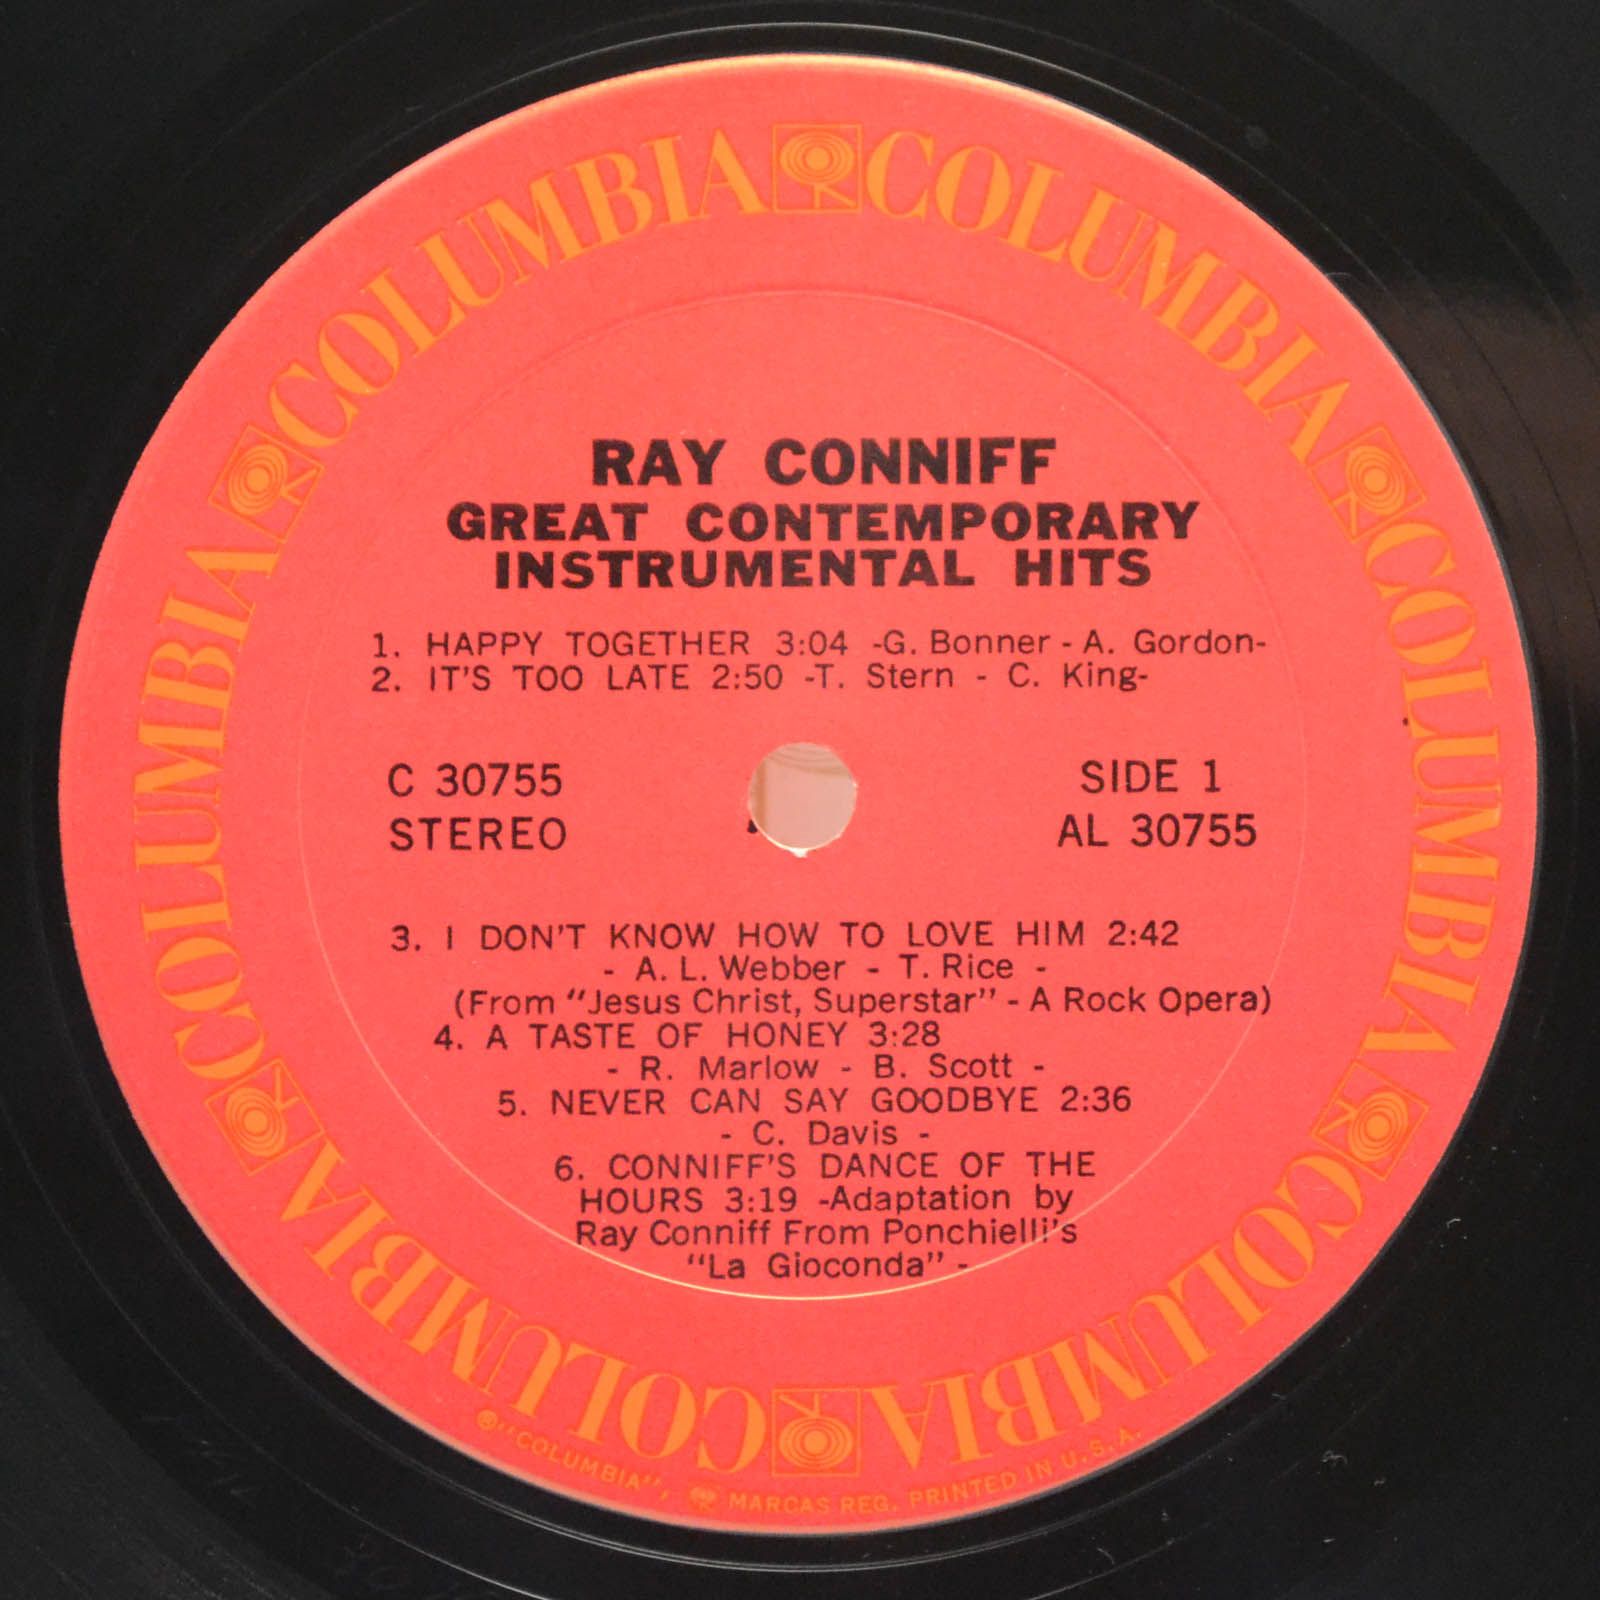 Ray Conniff — Great Contemporary Instrumental Hits (USA), 1971